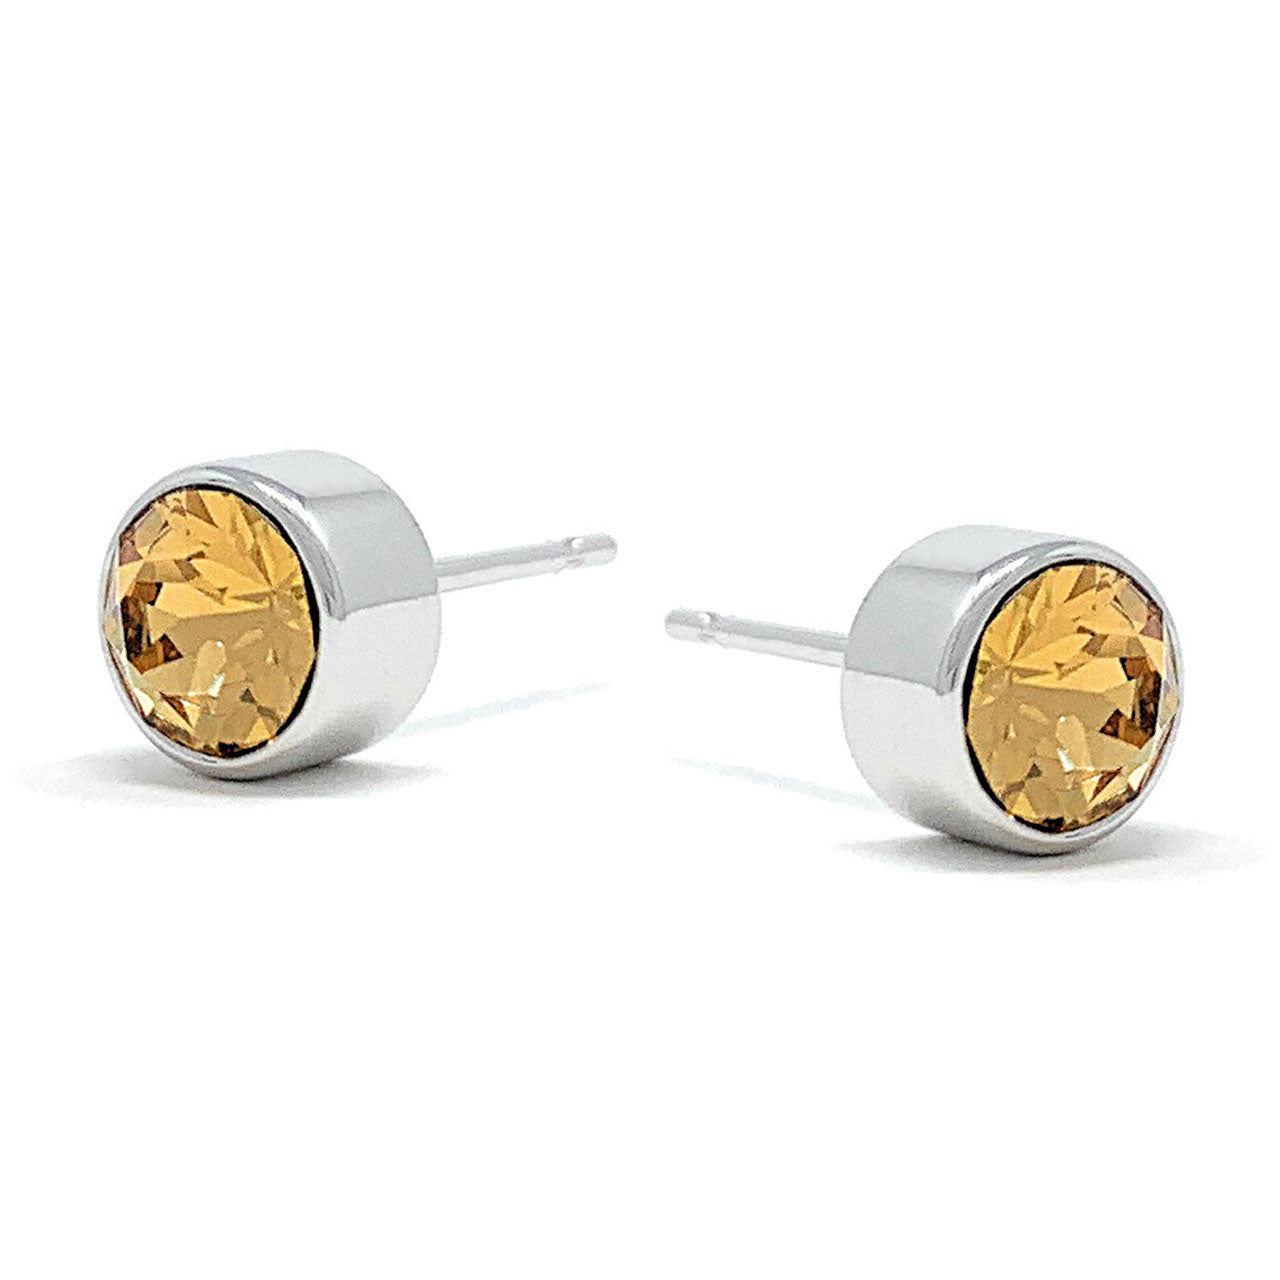 Harley Small Stud Earrings with Yellow Brown Light Topaz Round Crystals from Swarovski Silver Toned Rhodium Plated - Ed Heart